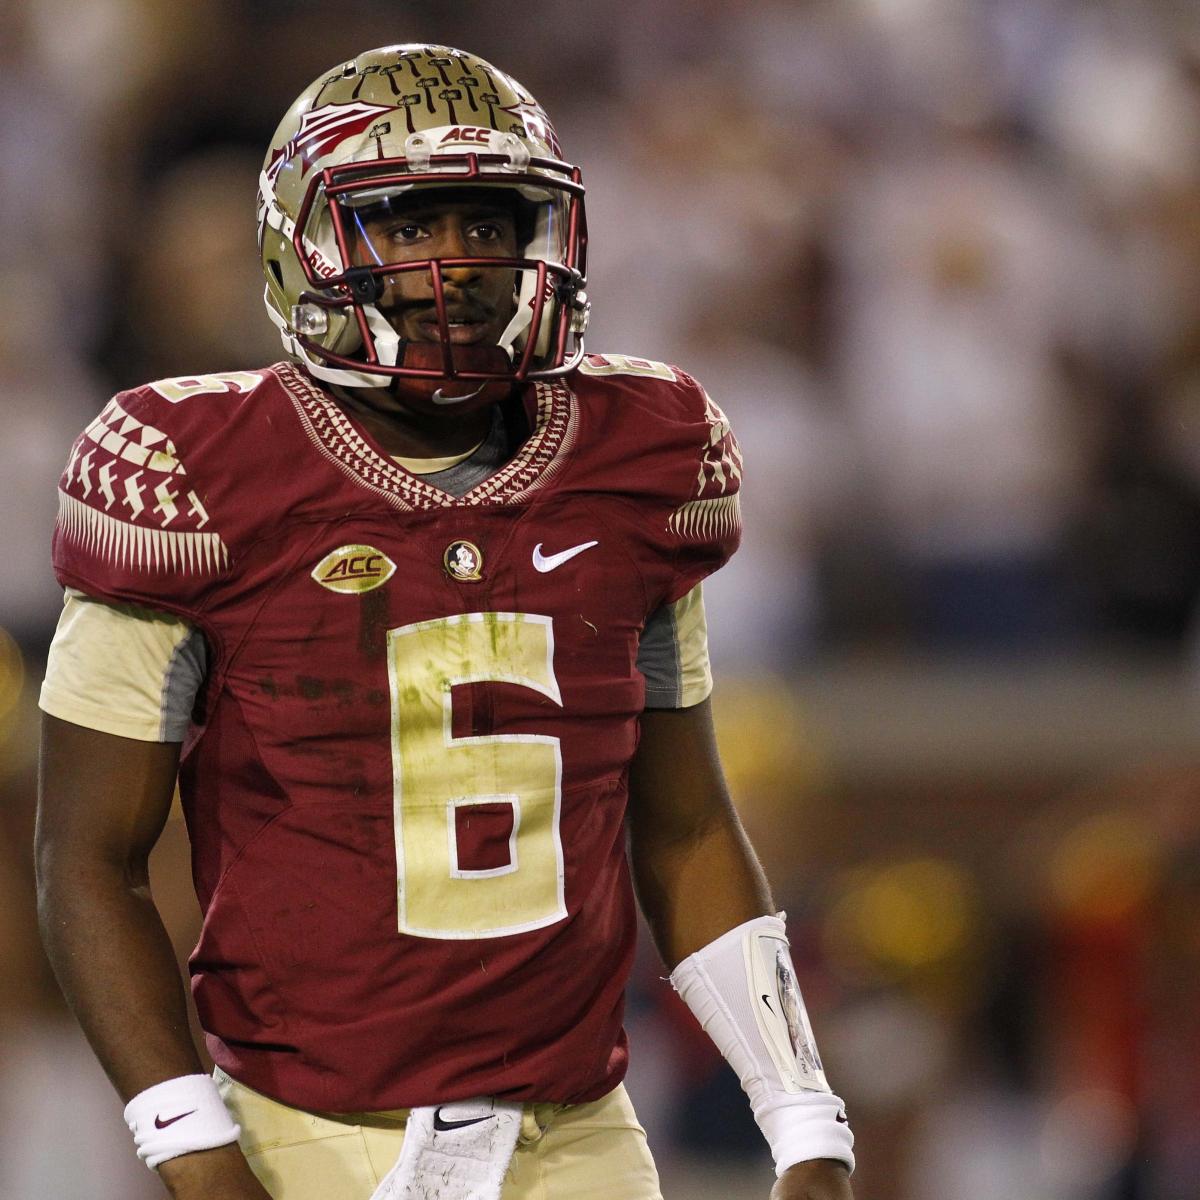 Florida State's Everett Golson Proves Graduate Transfer QBs Are Hit or